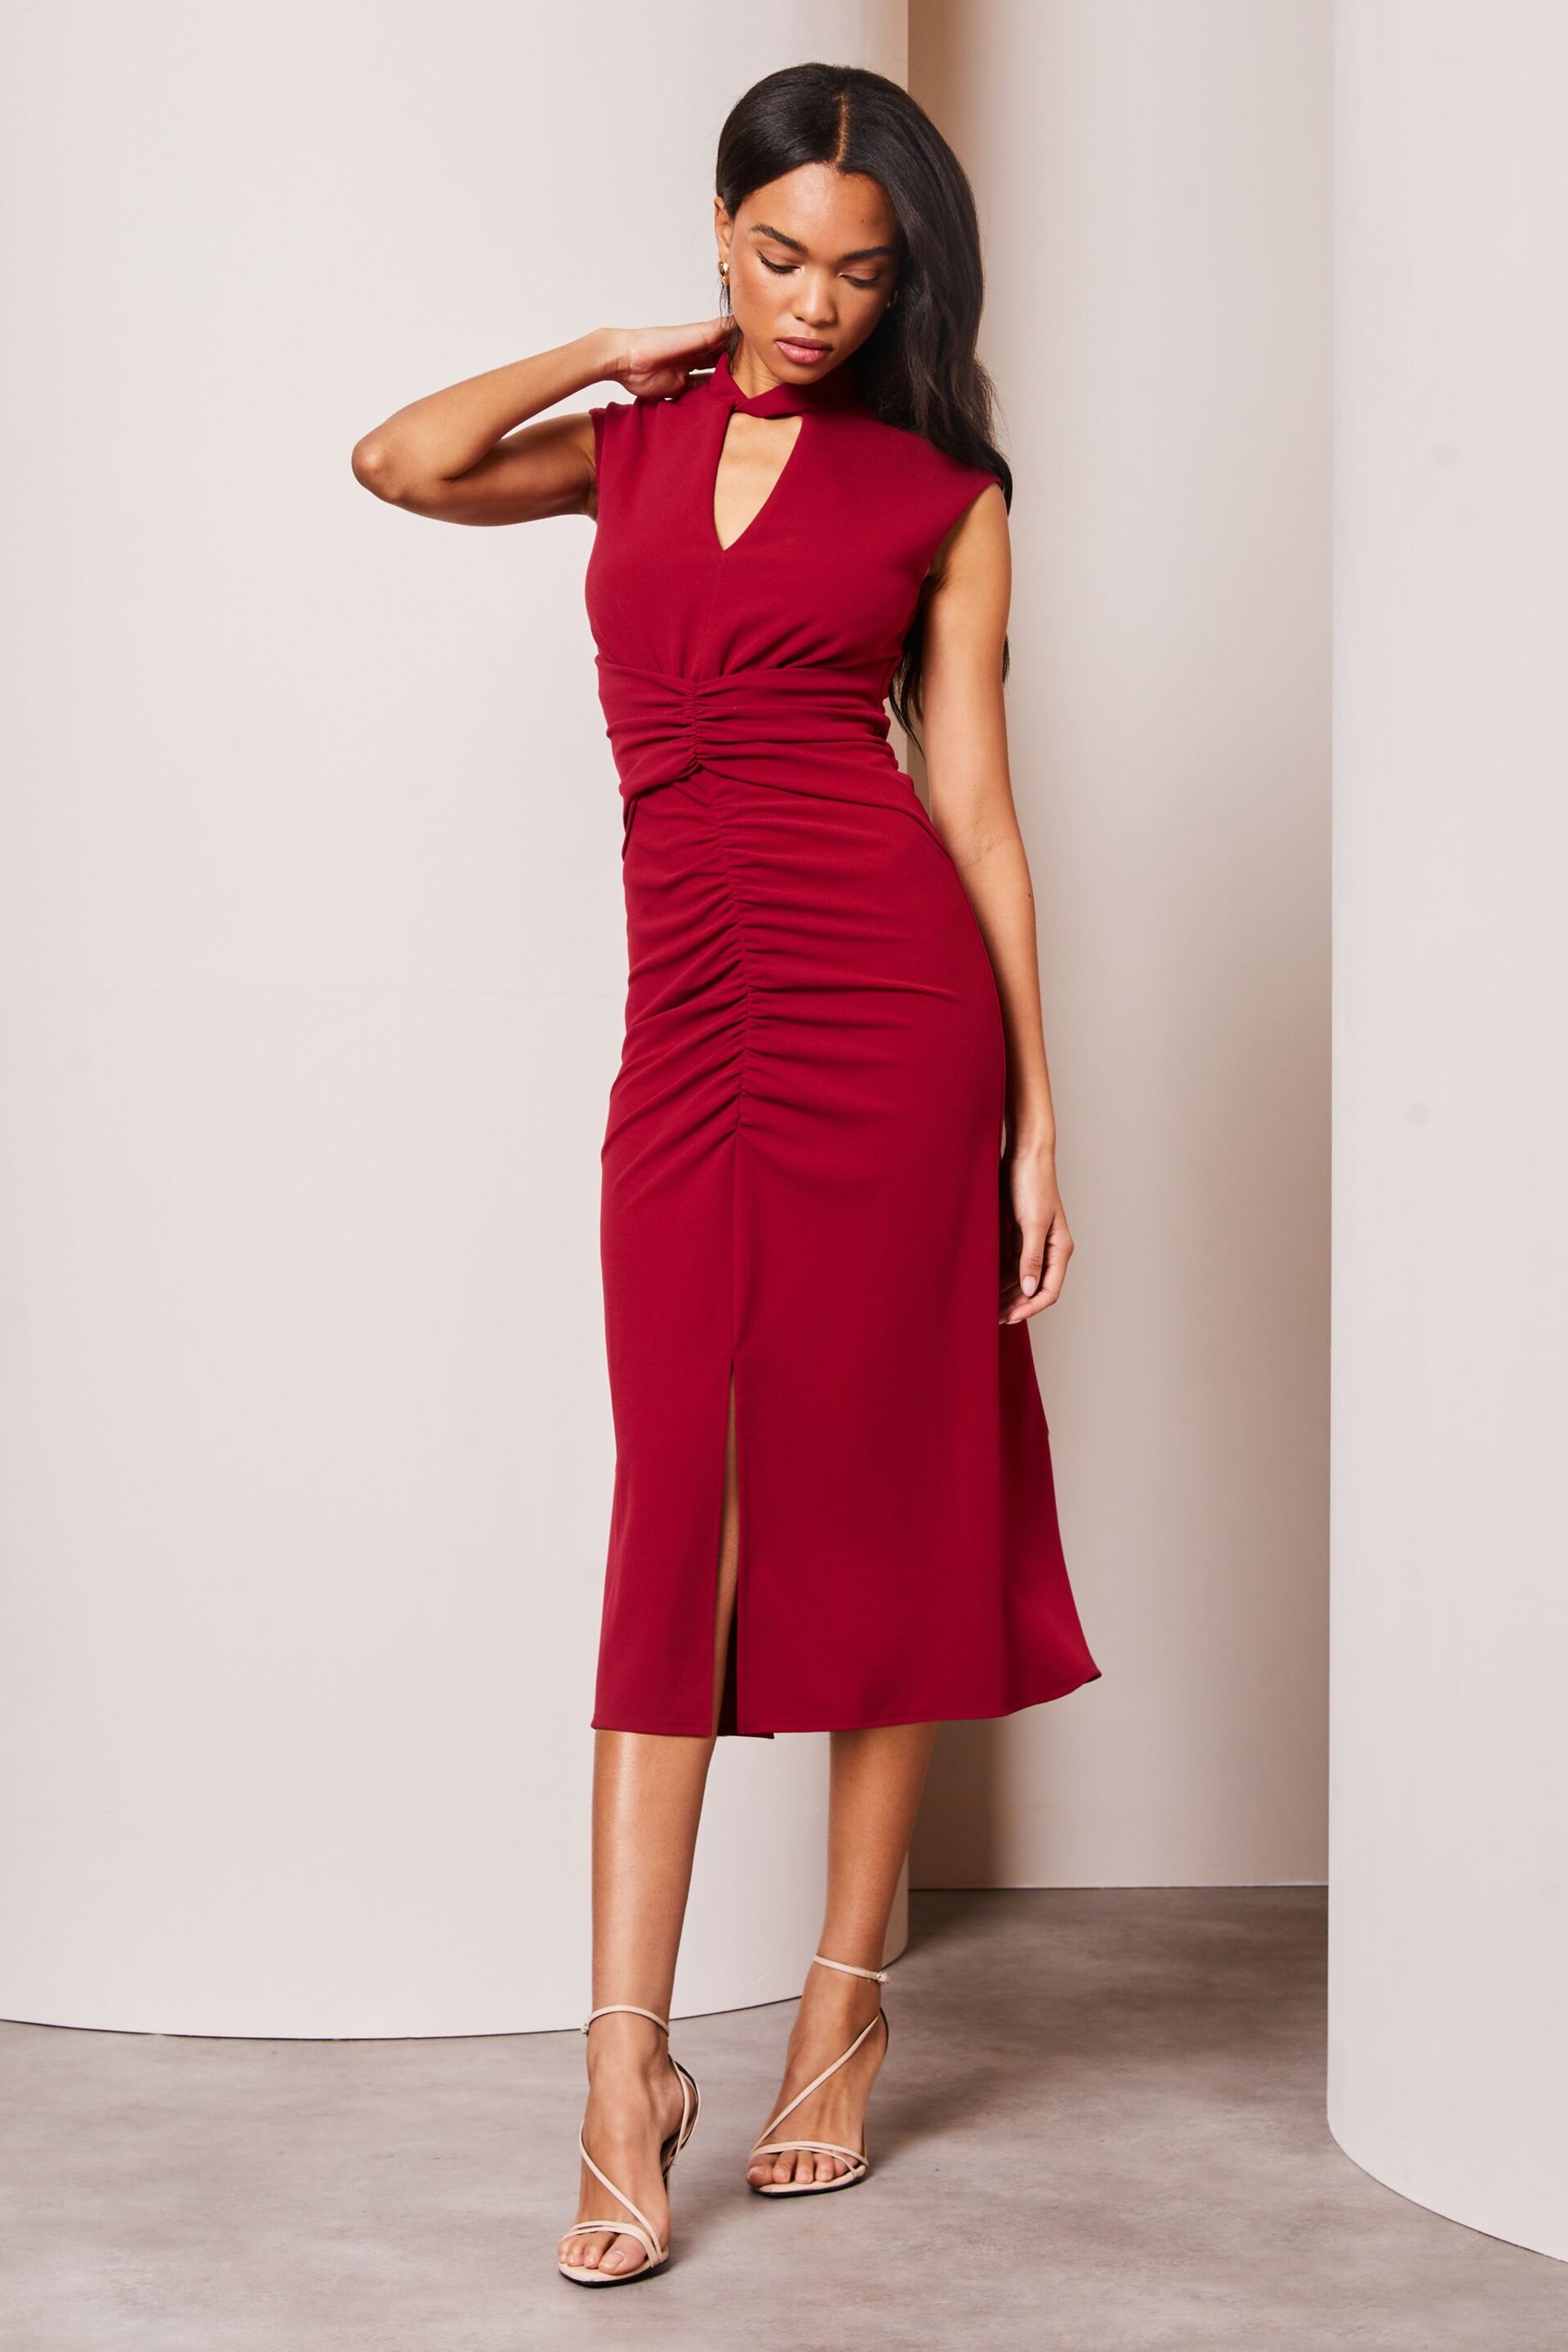 Lipsy Berry Red Ruched Front Keyhole Short Sleeve Midi Dress - Image 3 of 4